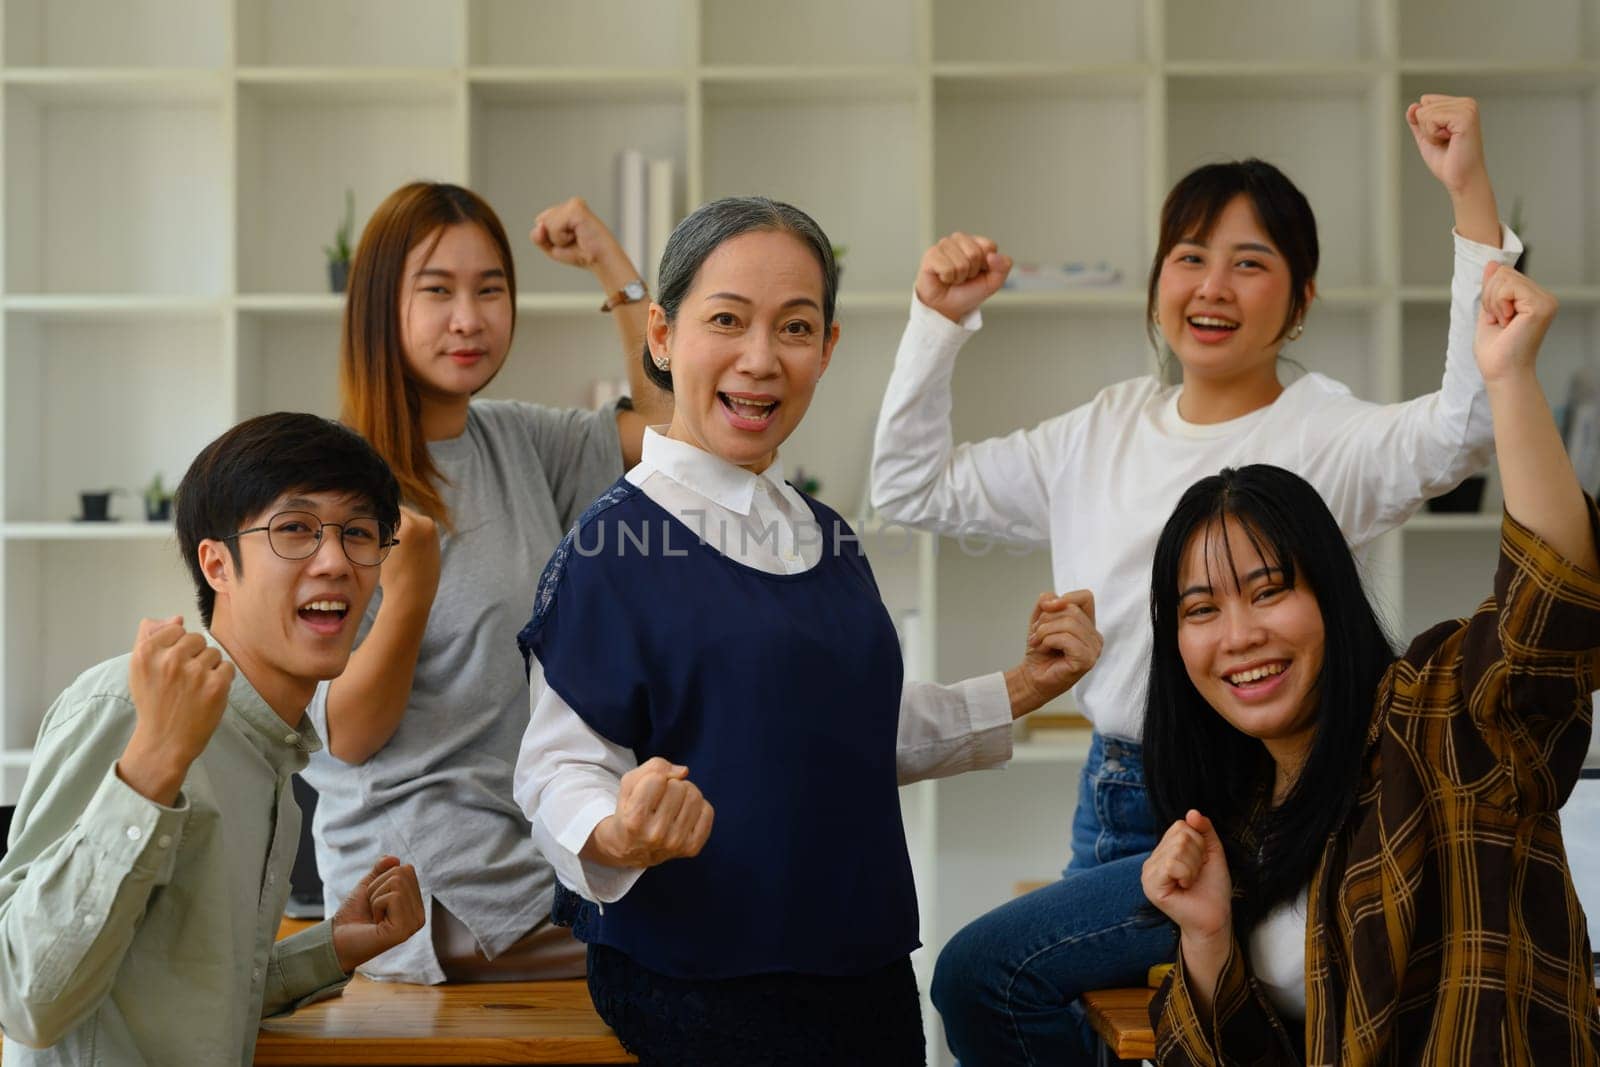 Group of happy university students and mature professor celebrating success in the classroom.